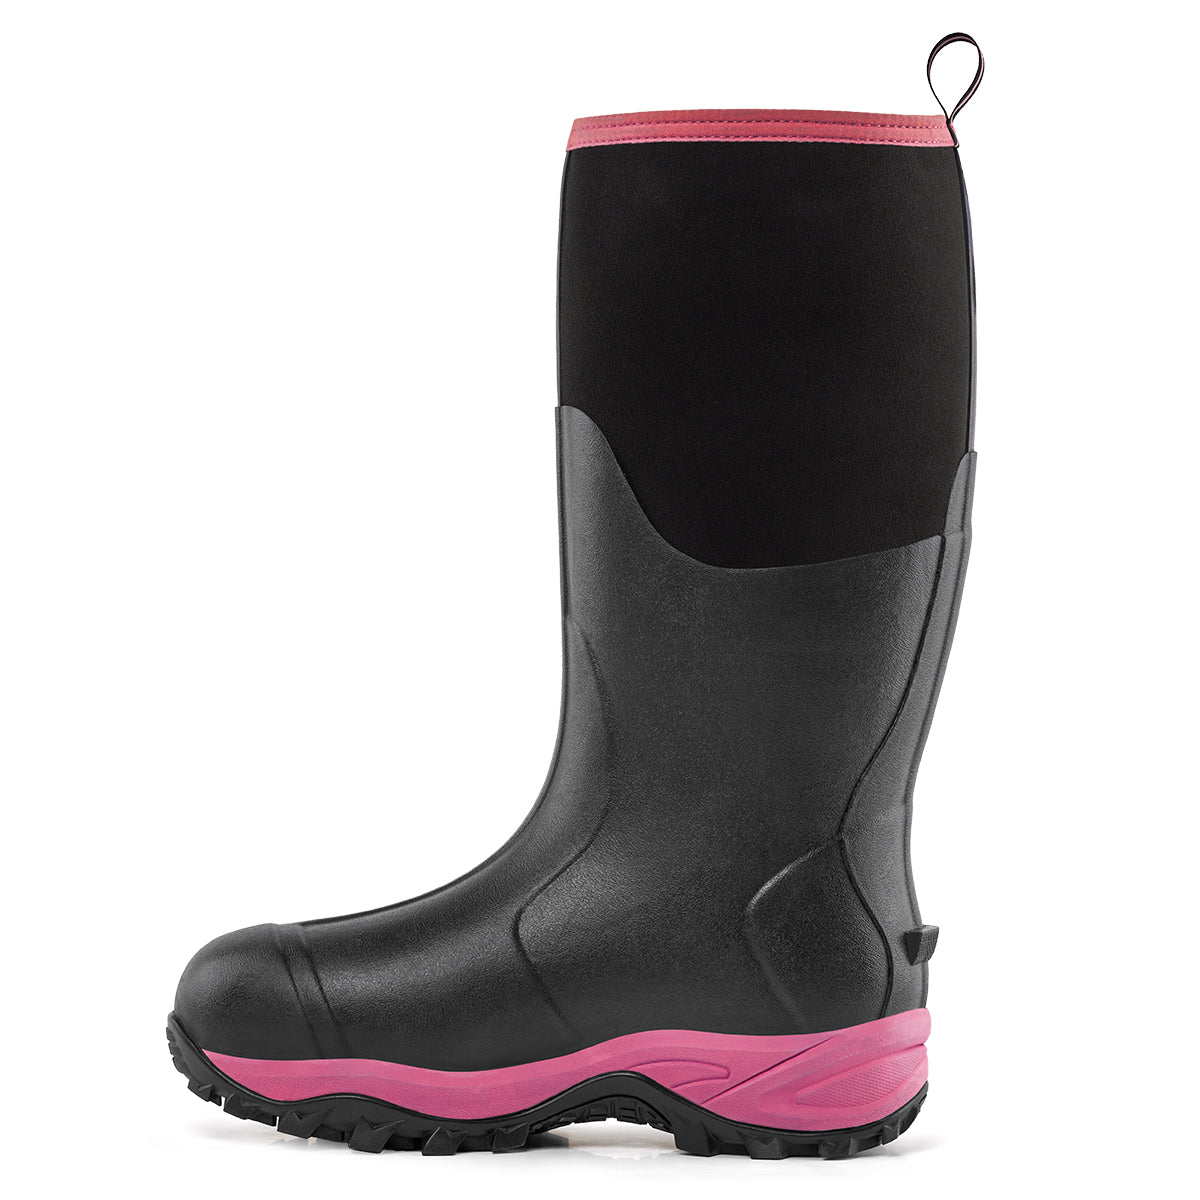 Trudave Tall Rubber Boots For Women With Steel Shank-Pink